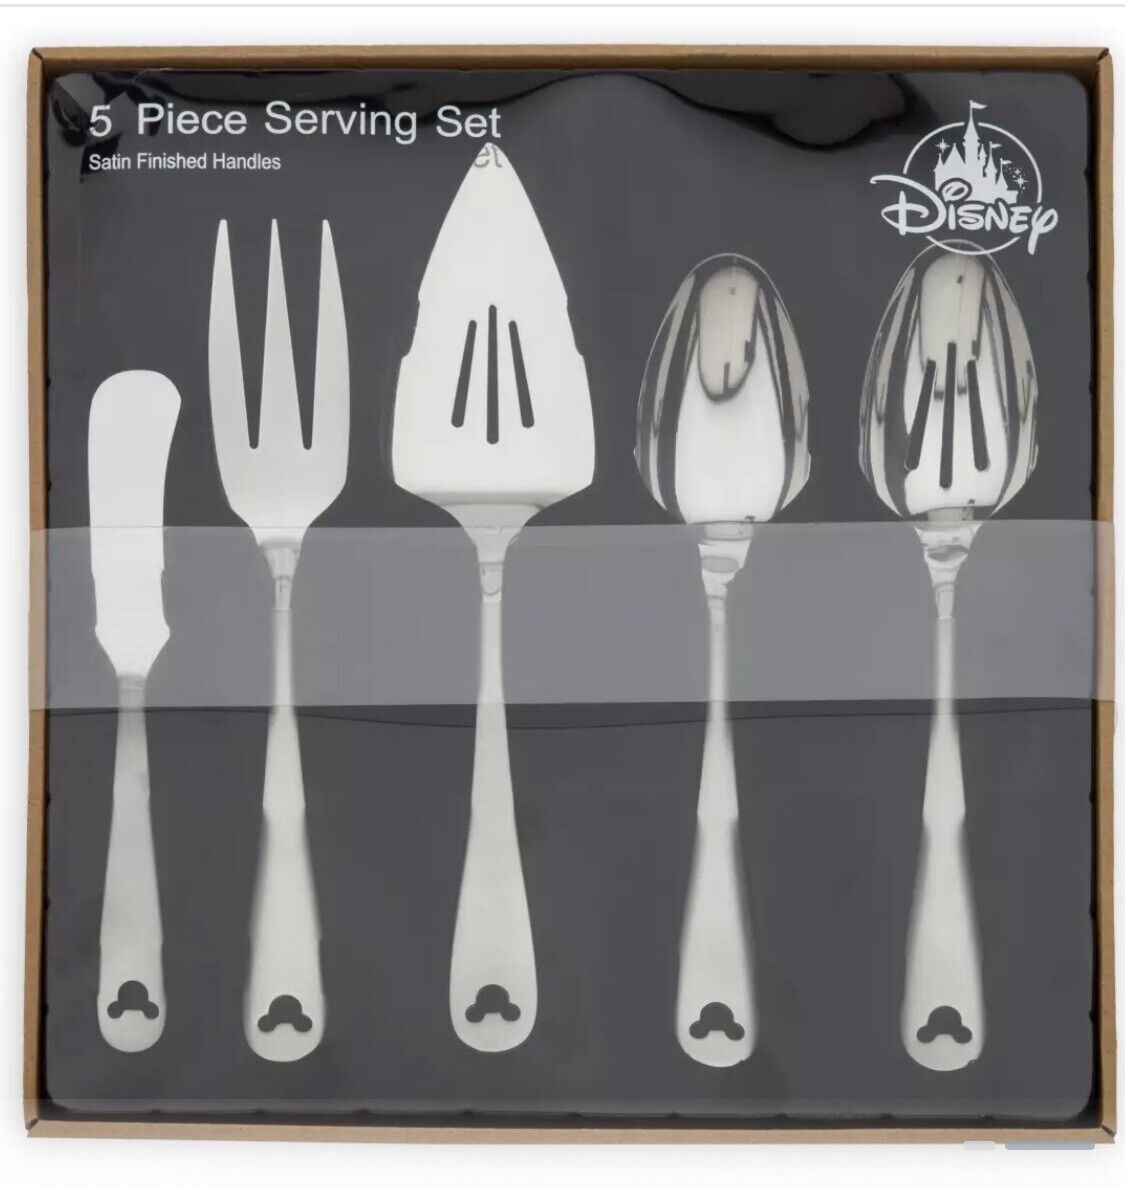 Disney Mickey Mouse Icon 5 Piece Serving Set Satin Finished Handles